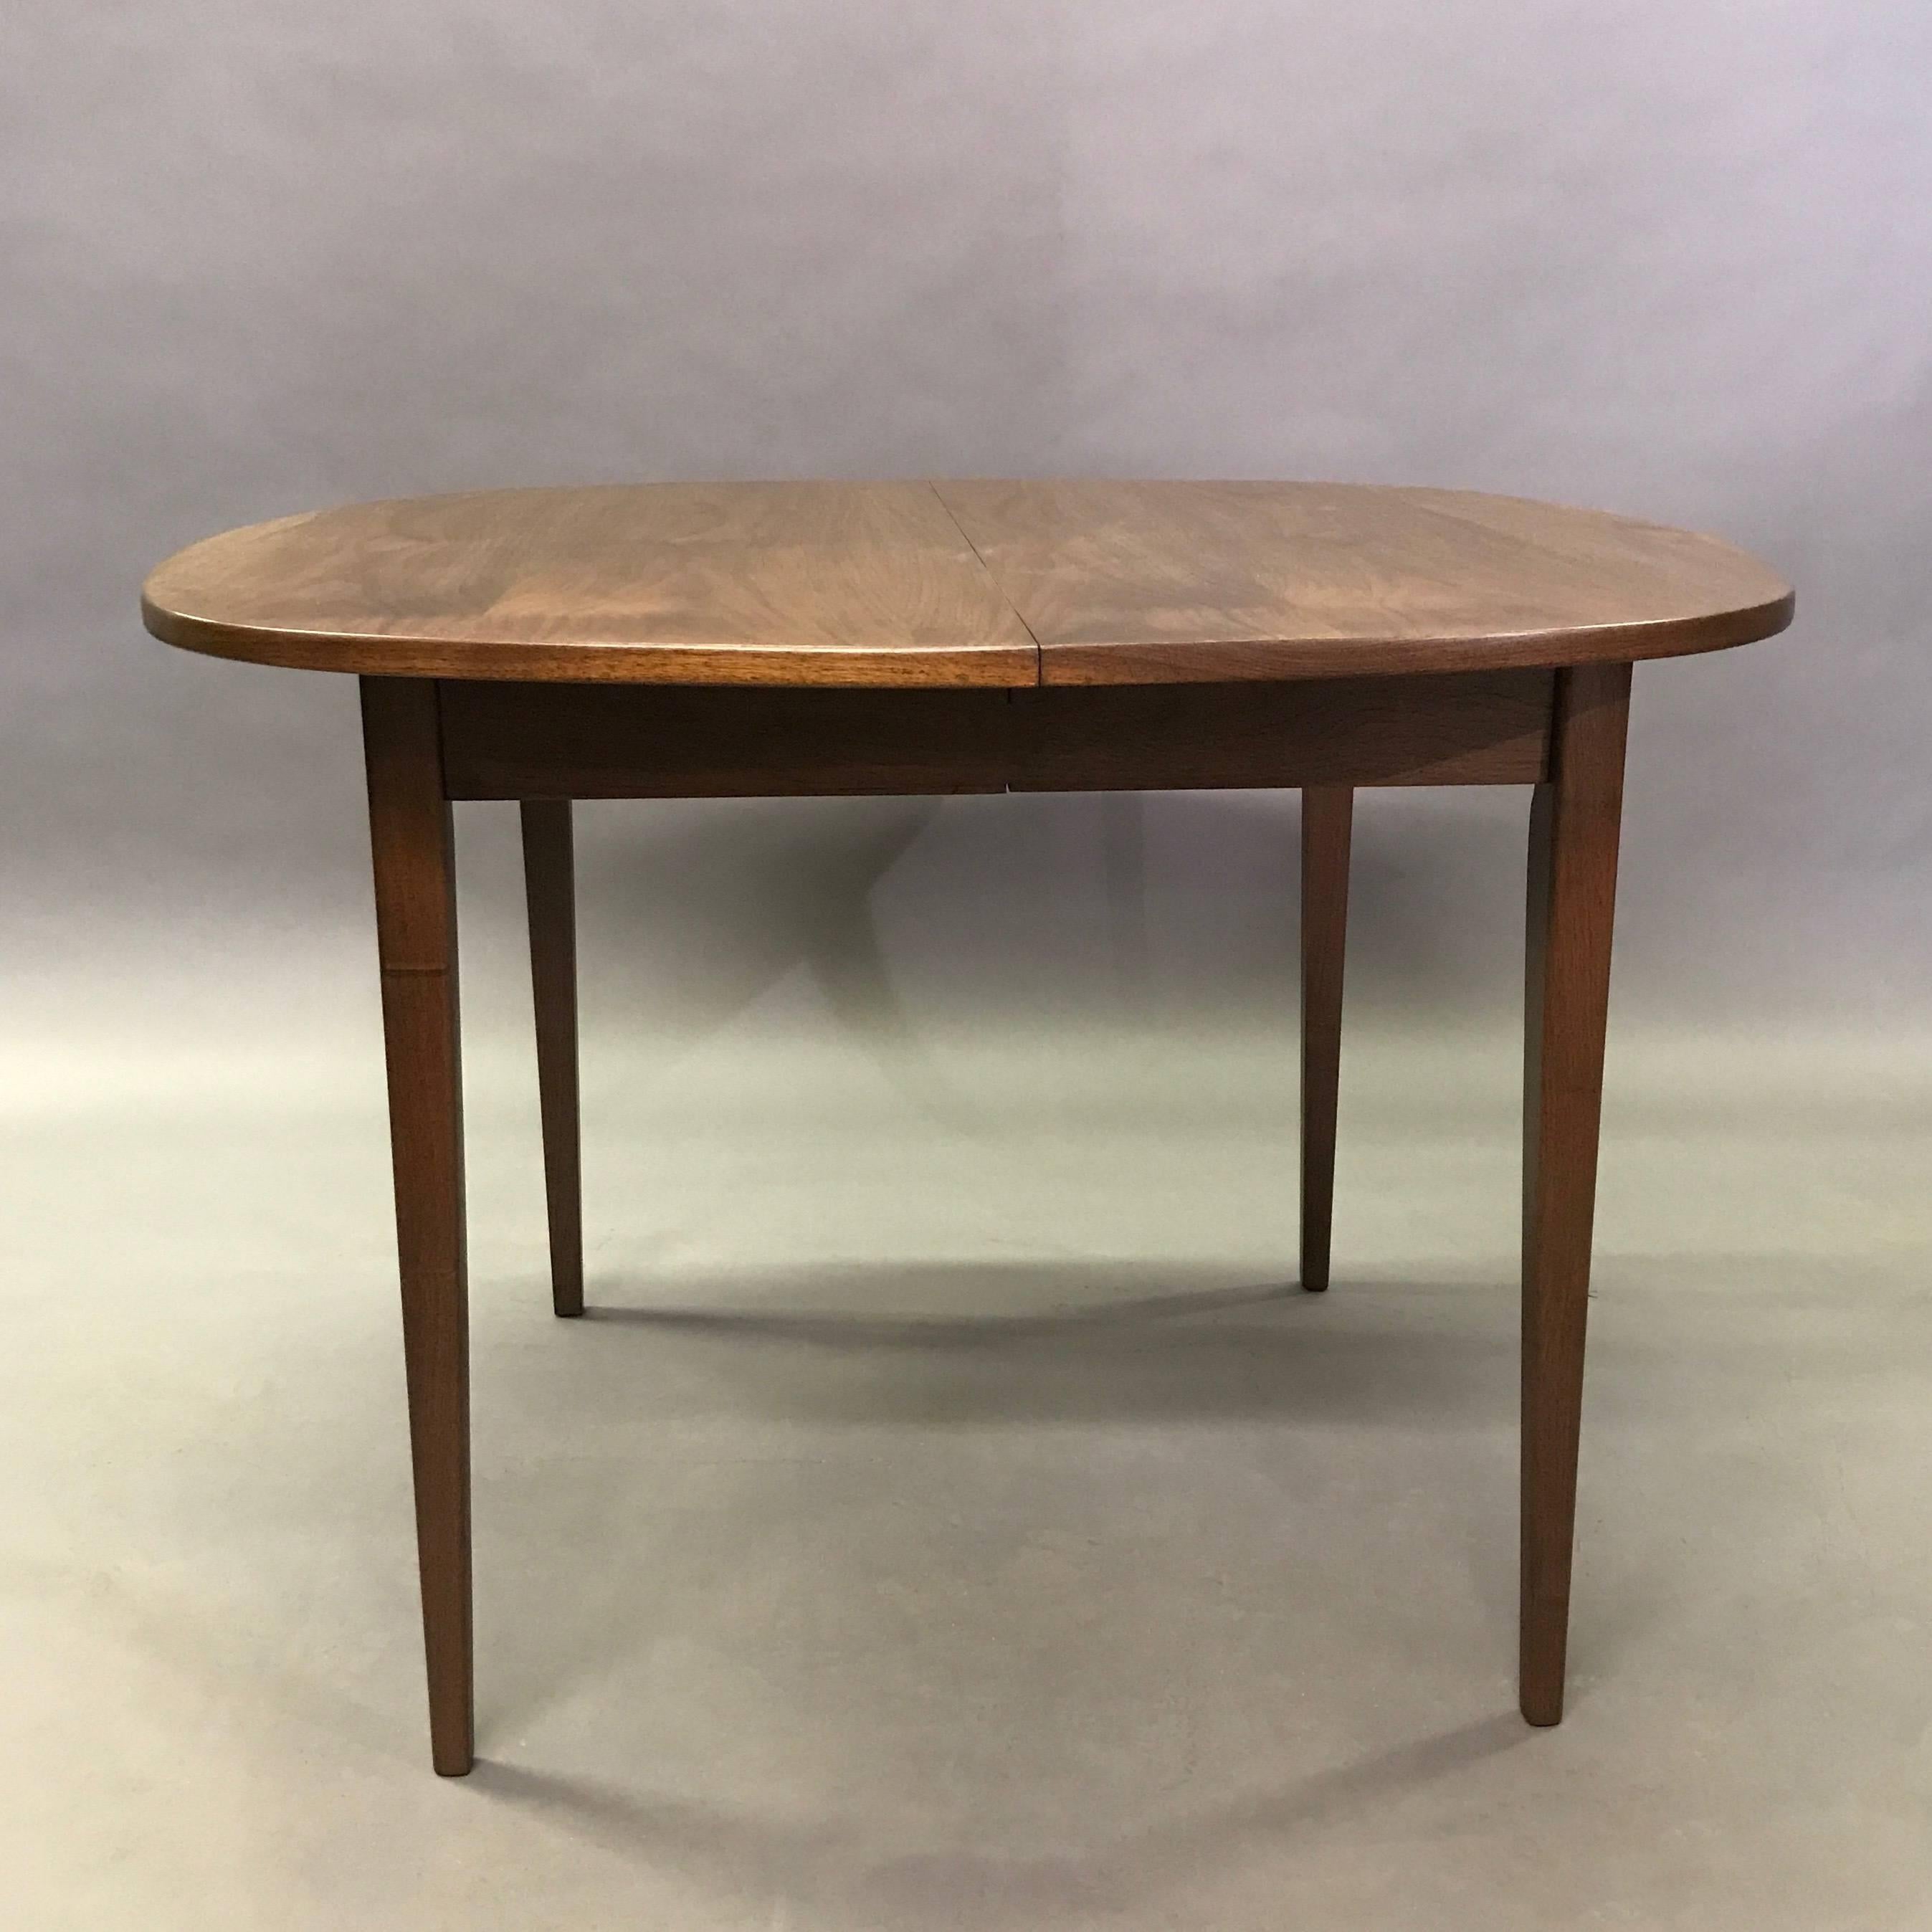 American Mid-Century Modern Rounded Walnut Dining Table